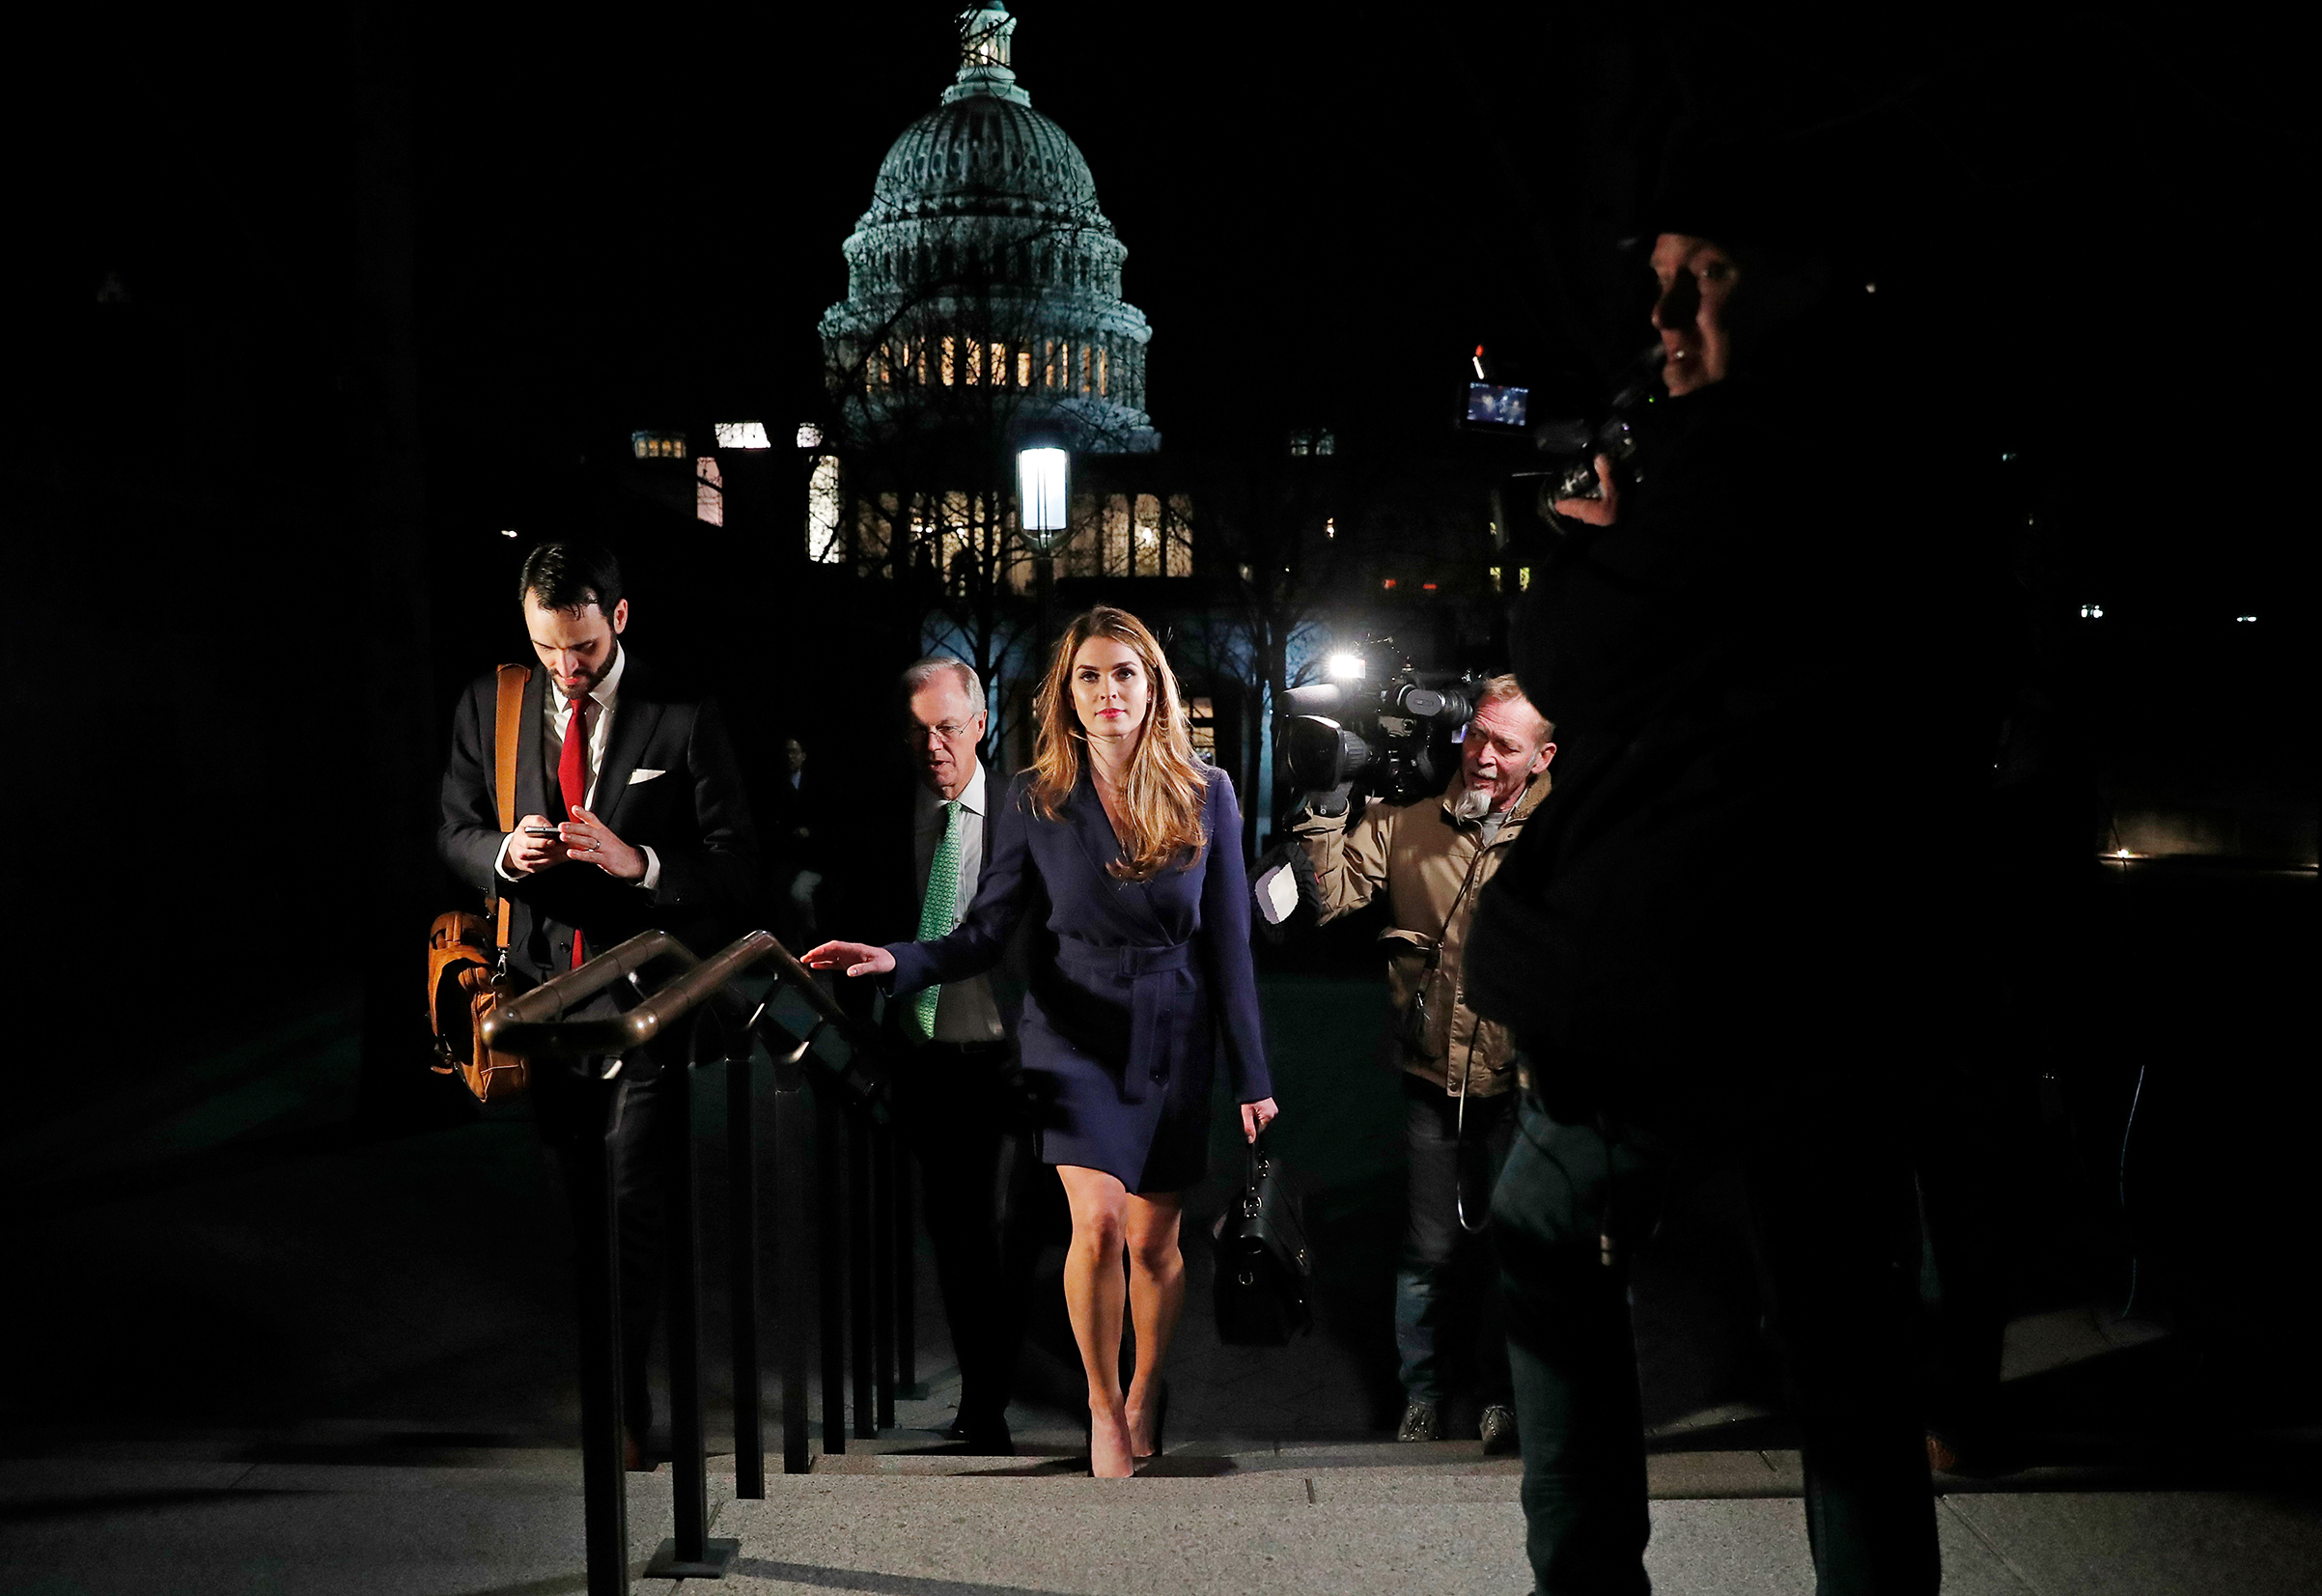 White House Communications Director Hope Hicks leaves the U.S. Capitol in Washington on Feb. 27, 2018. (Leah Millis—Reuters)